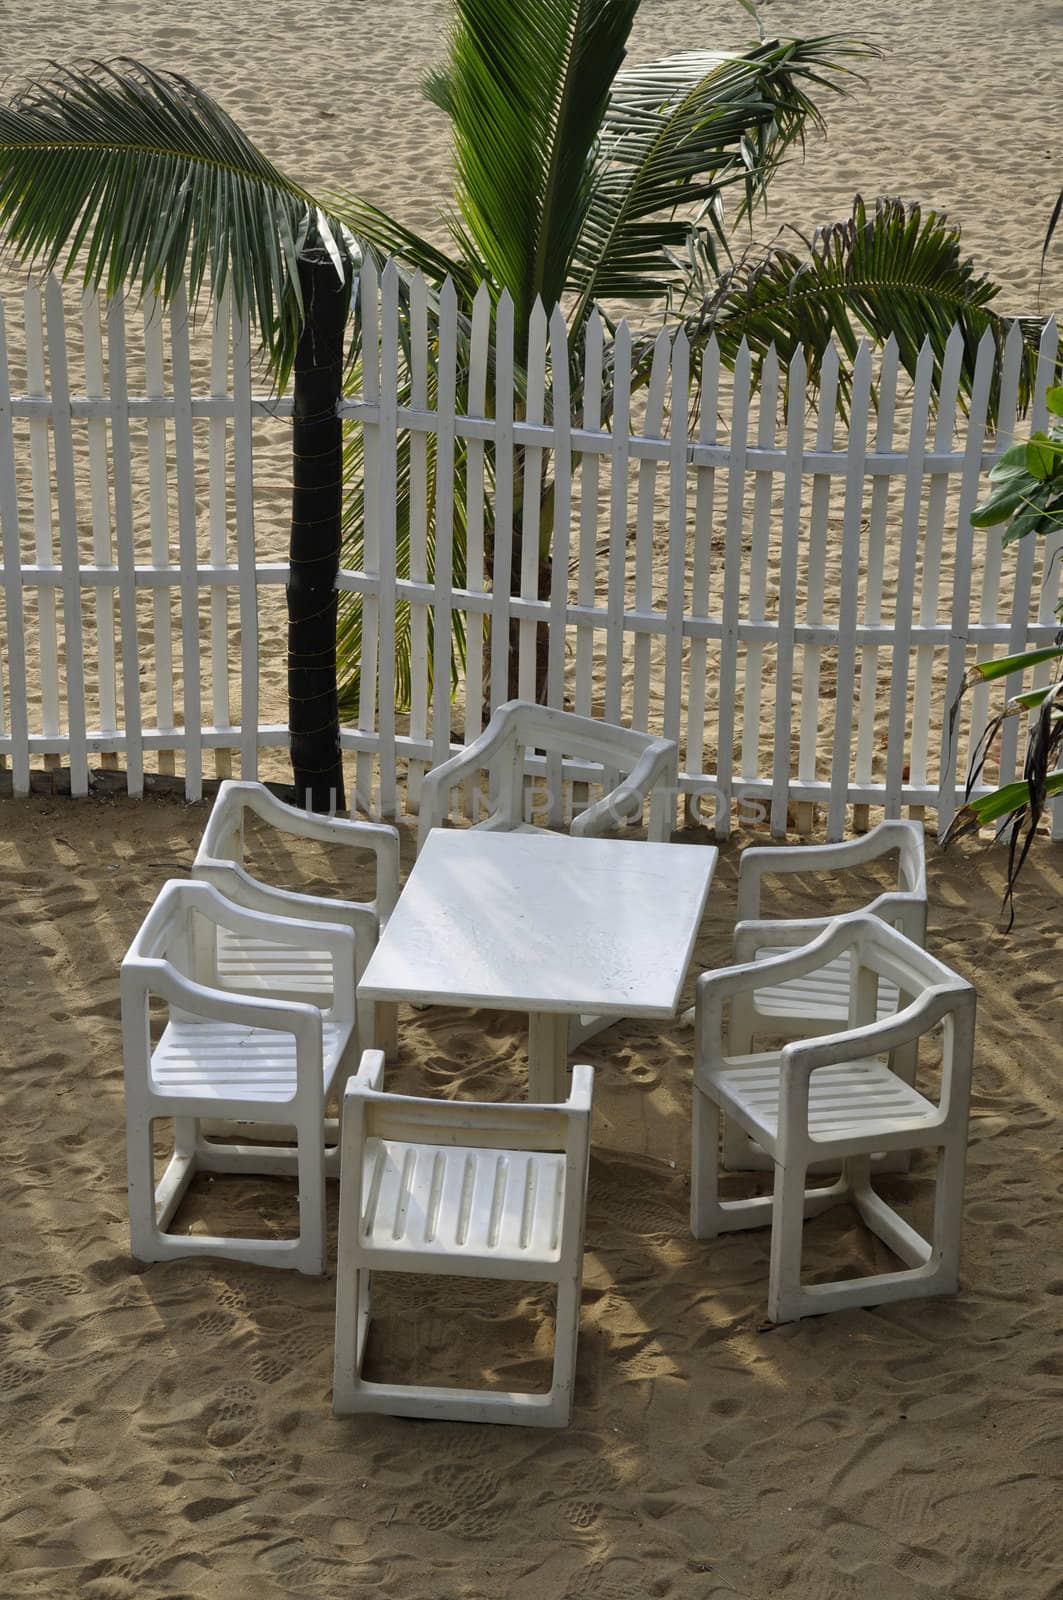 White chairs against a palm tree at a cafe at the beach by kdreams02